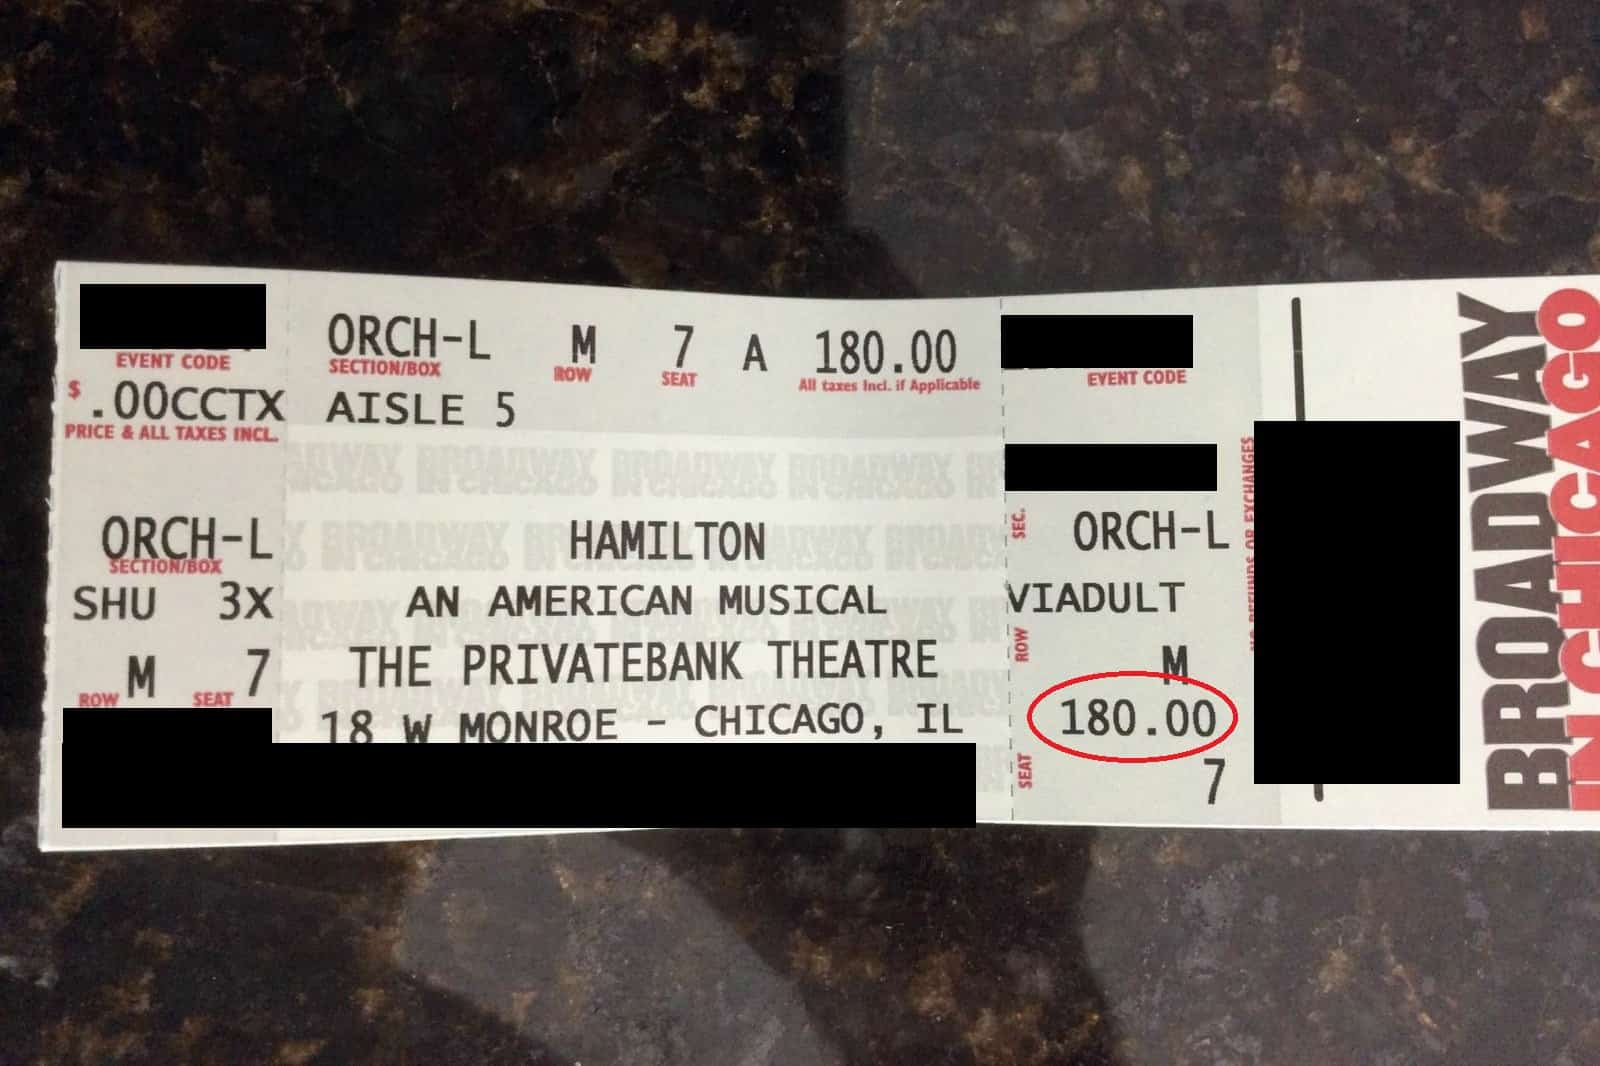 get-hamilton-tickets-at-face-value-chicago-on-the-cheap